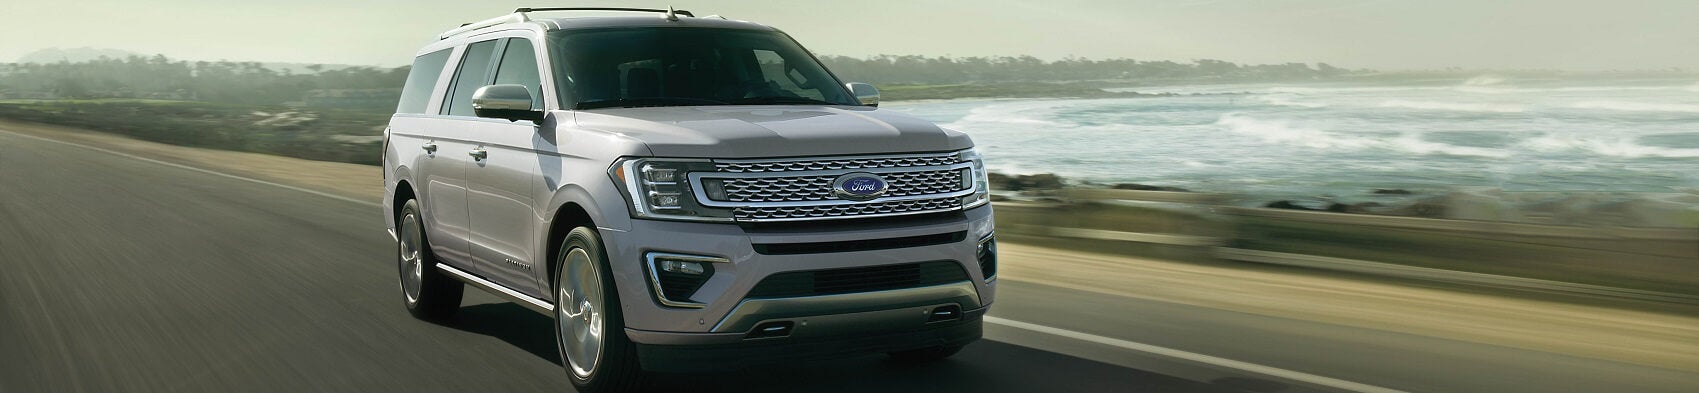 2021 Ford Expedition near Morgan Hill CA